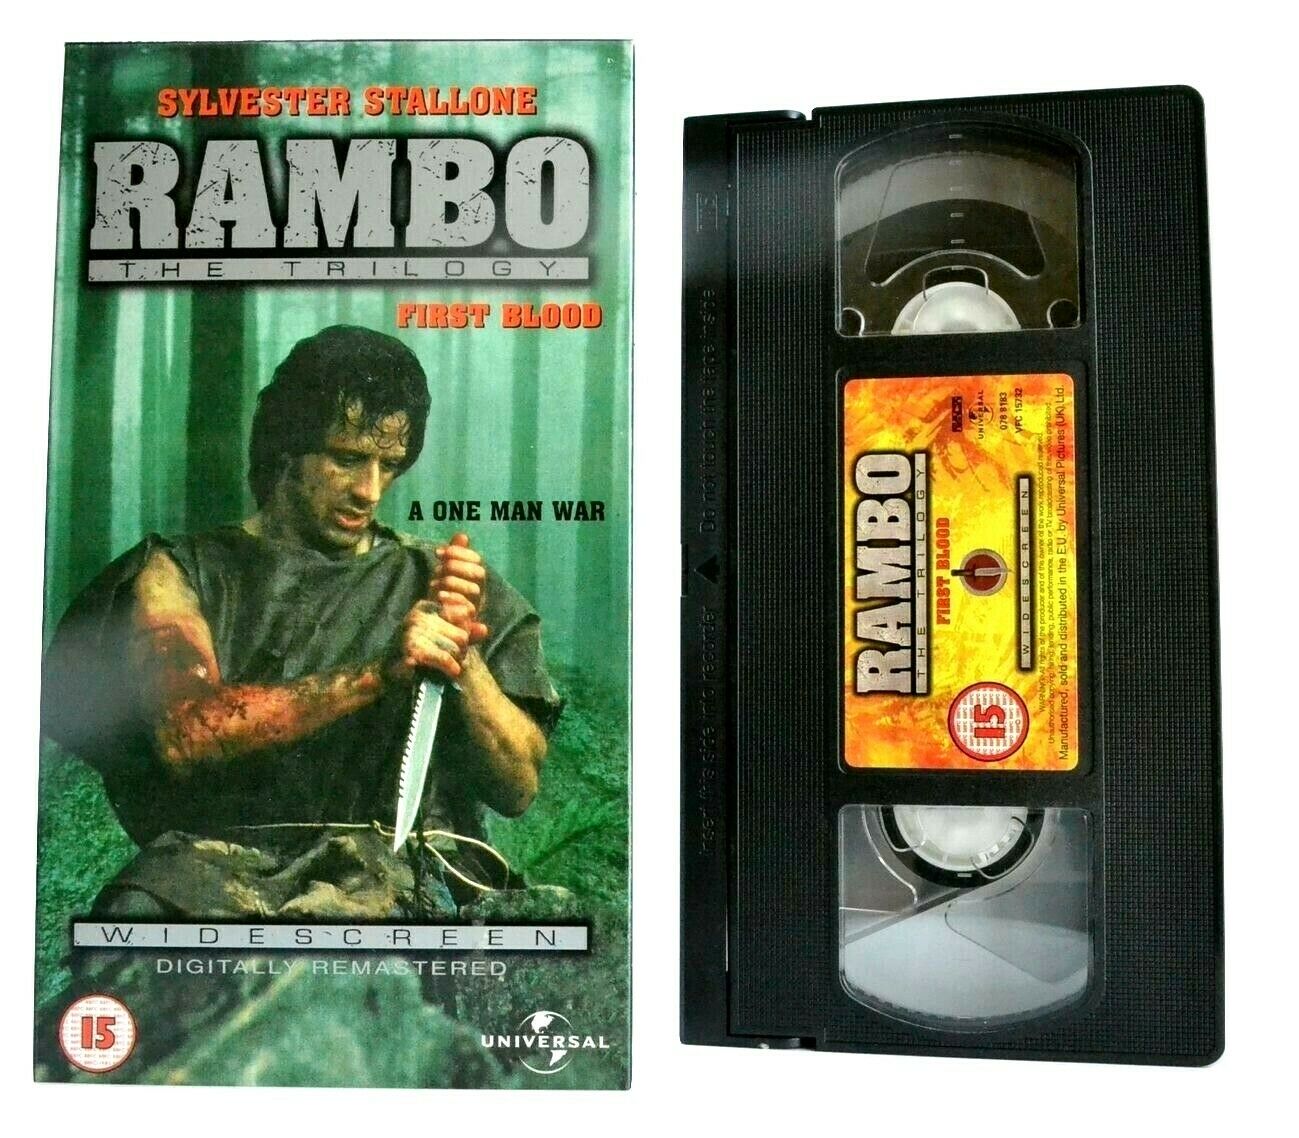 Rambo: First Blood - Digitally Remastered - Widescreen Action - S.Stallone - VHS-